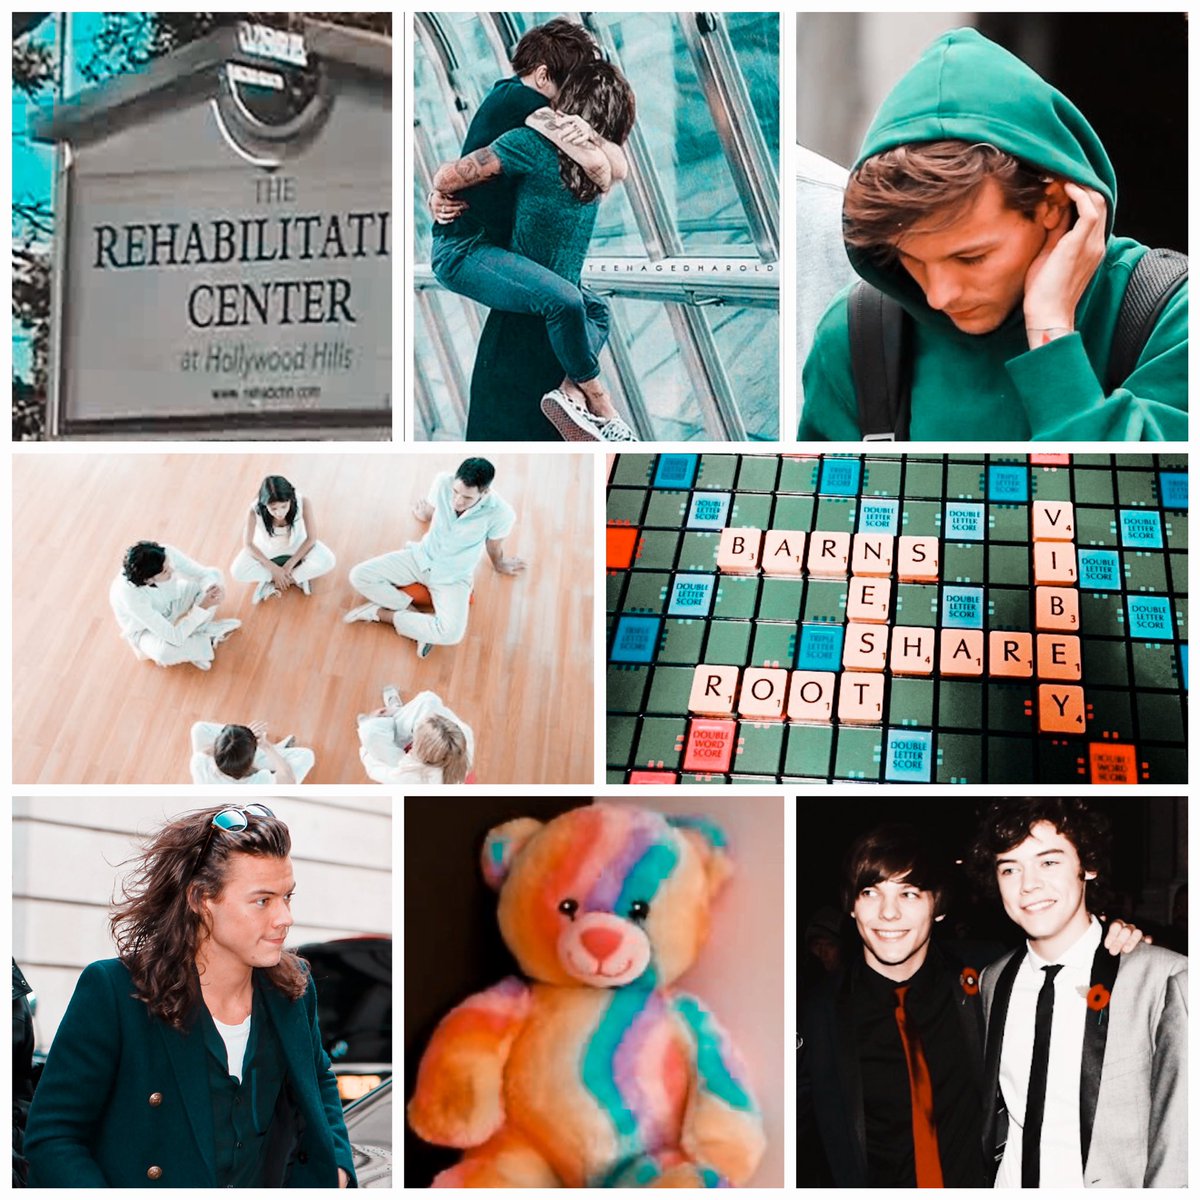 Own The Scars: best friends to lovers, addict Louis, med student Harry, childhood friends, overdose, rehab/recovery, hurt/comfort, slow burn, angst, Louis/Grimmy, fluff, ot5, eventual smut READ TAGS FOR TRIGGERS  https://archiveofourown.org/works/13919727/chapters/32037252